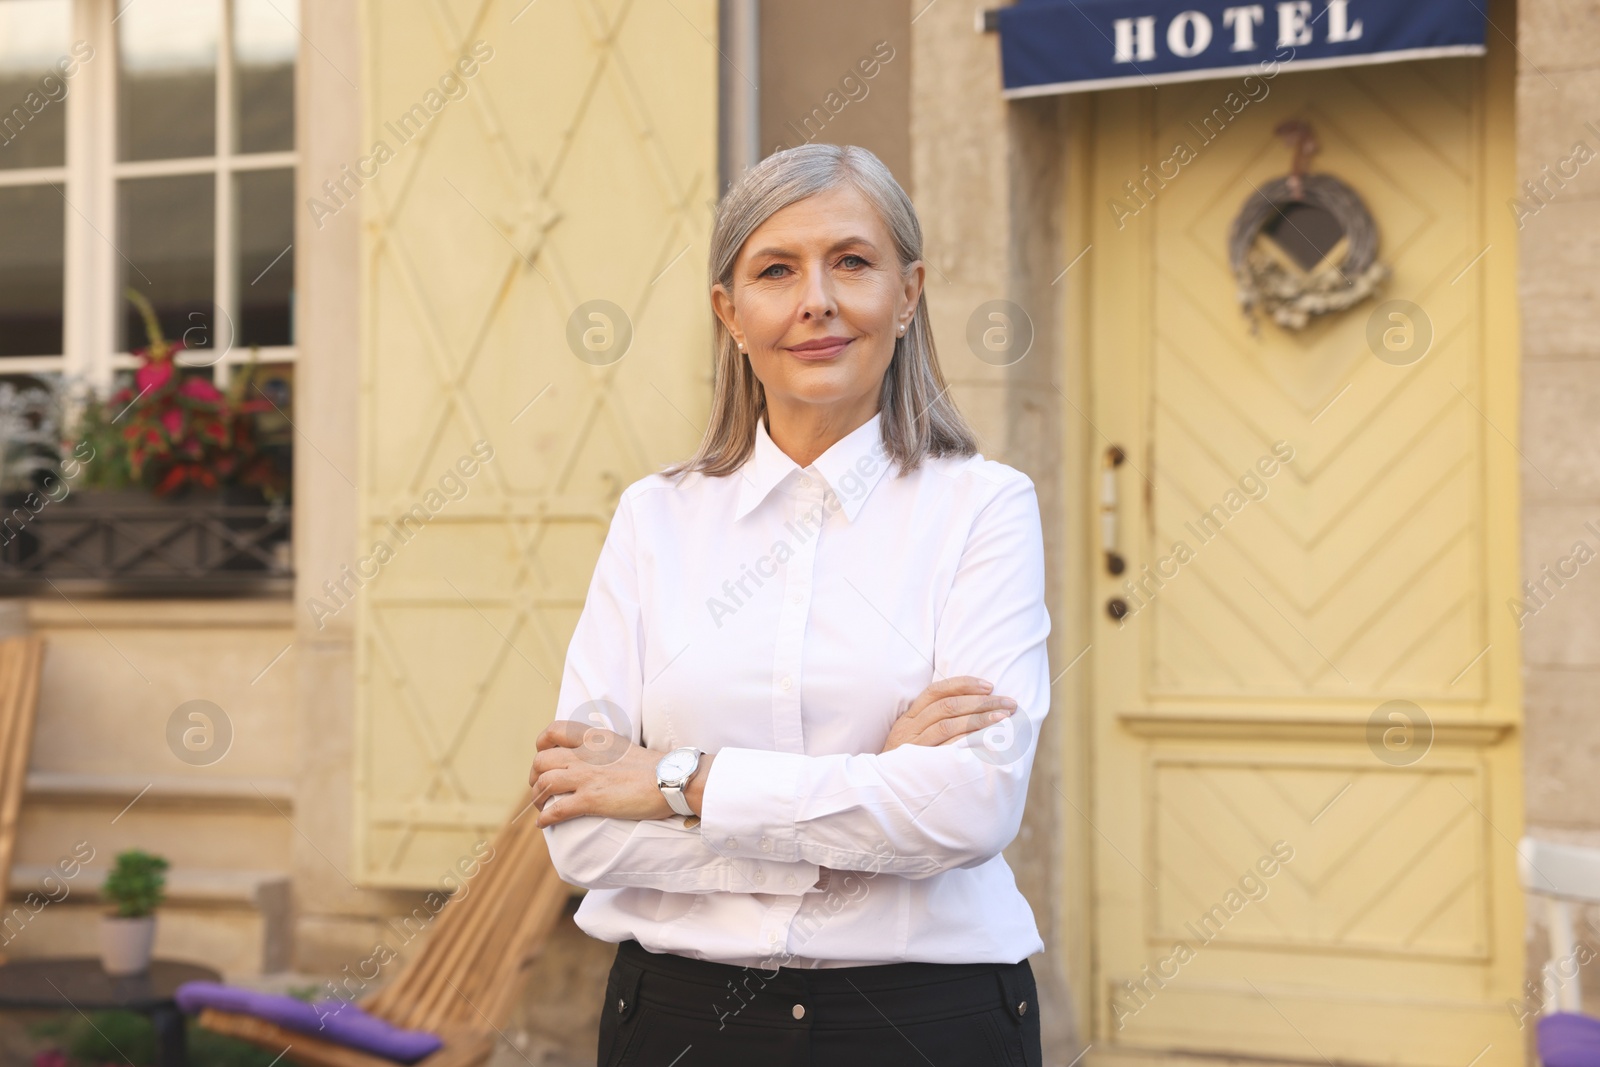 Photo of Smiling business owner near her hotel outdoors